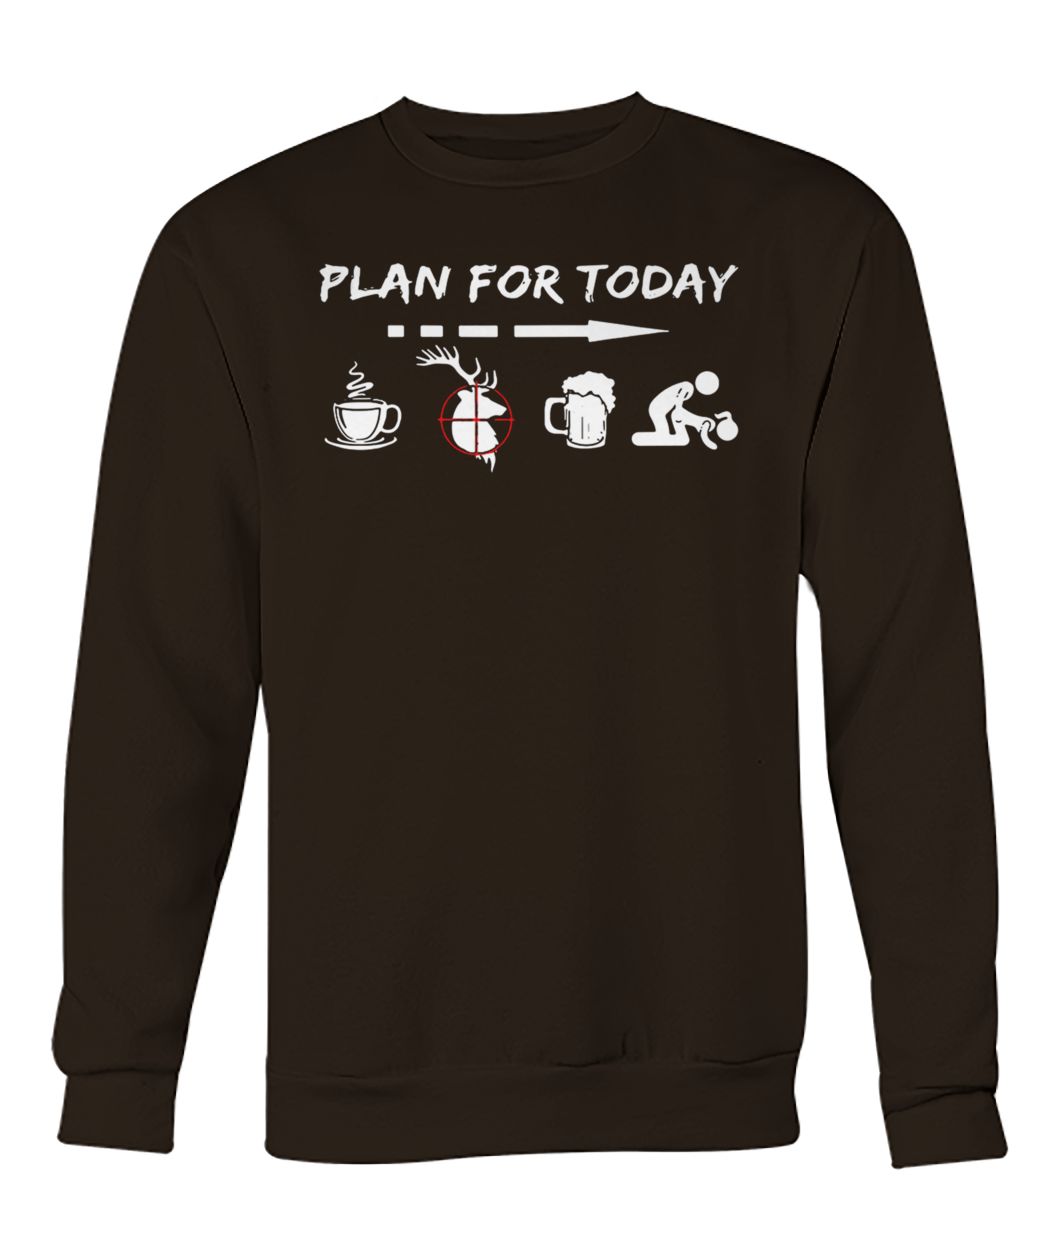 Plan for today are coffee hunter beer and sex crew neck sweatshirt